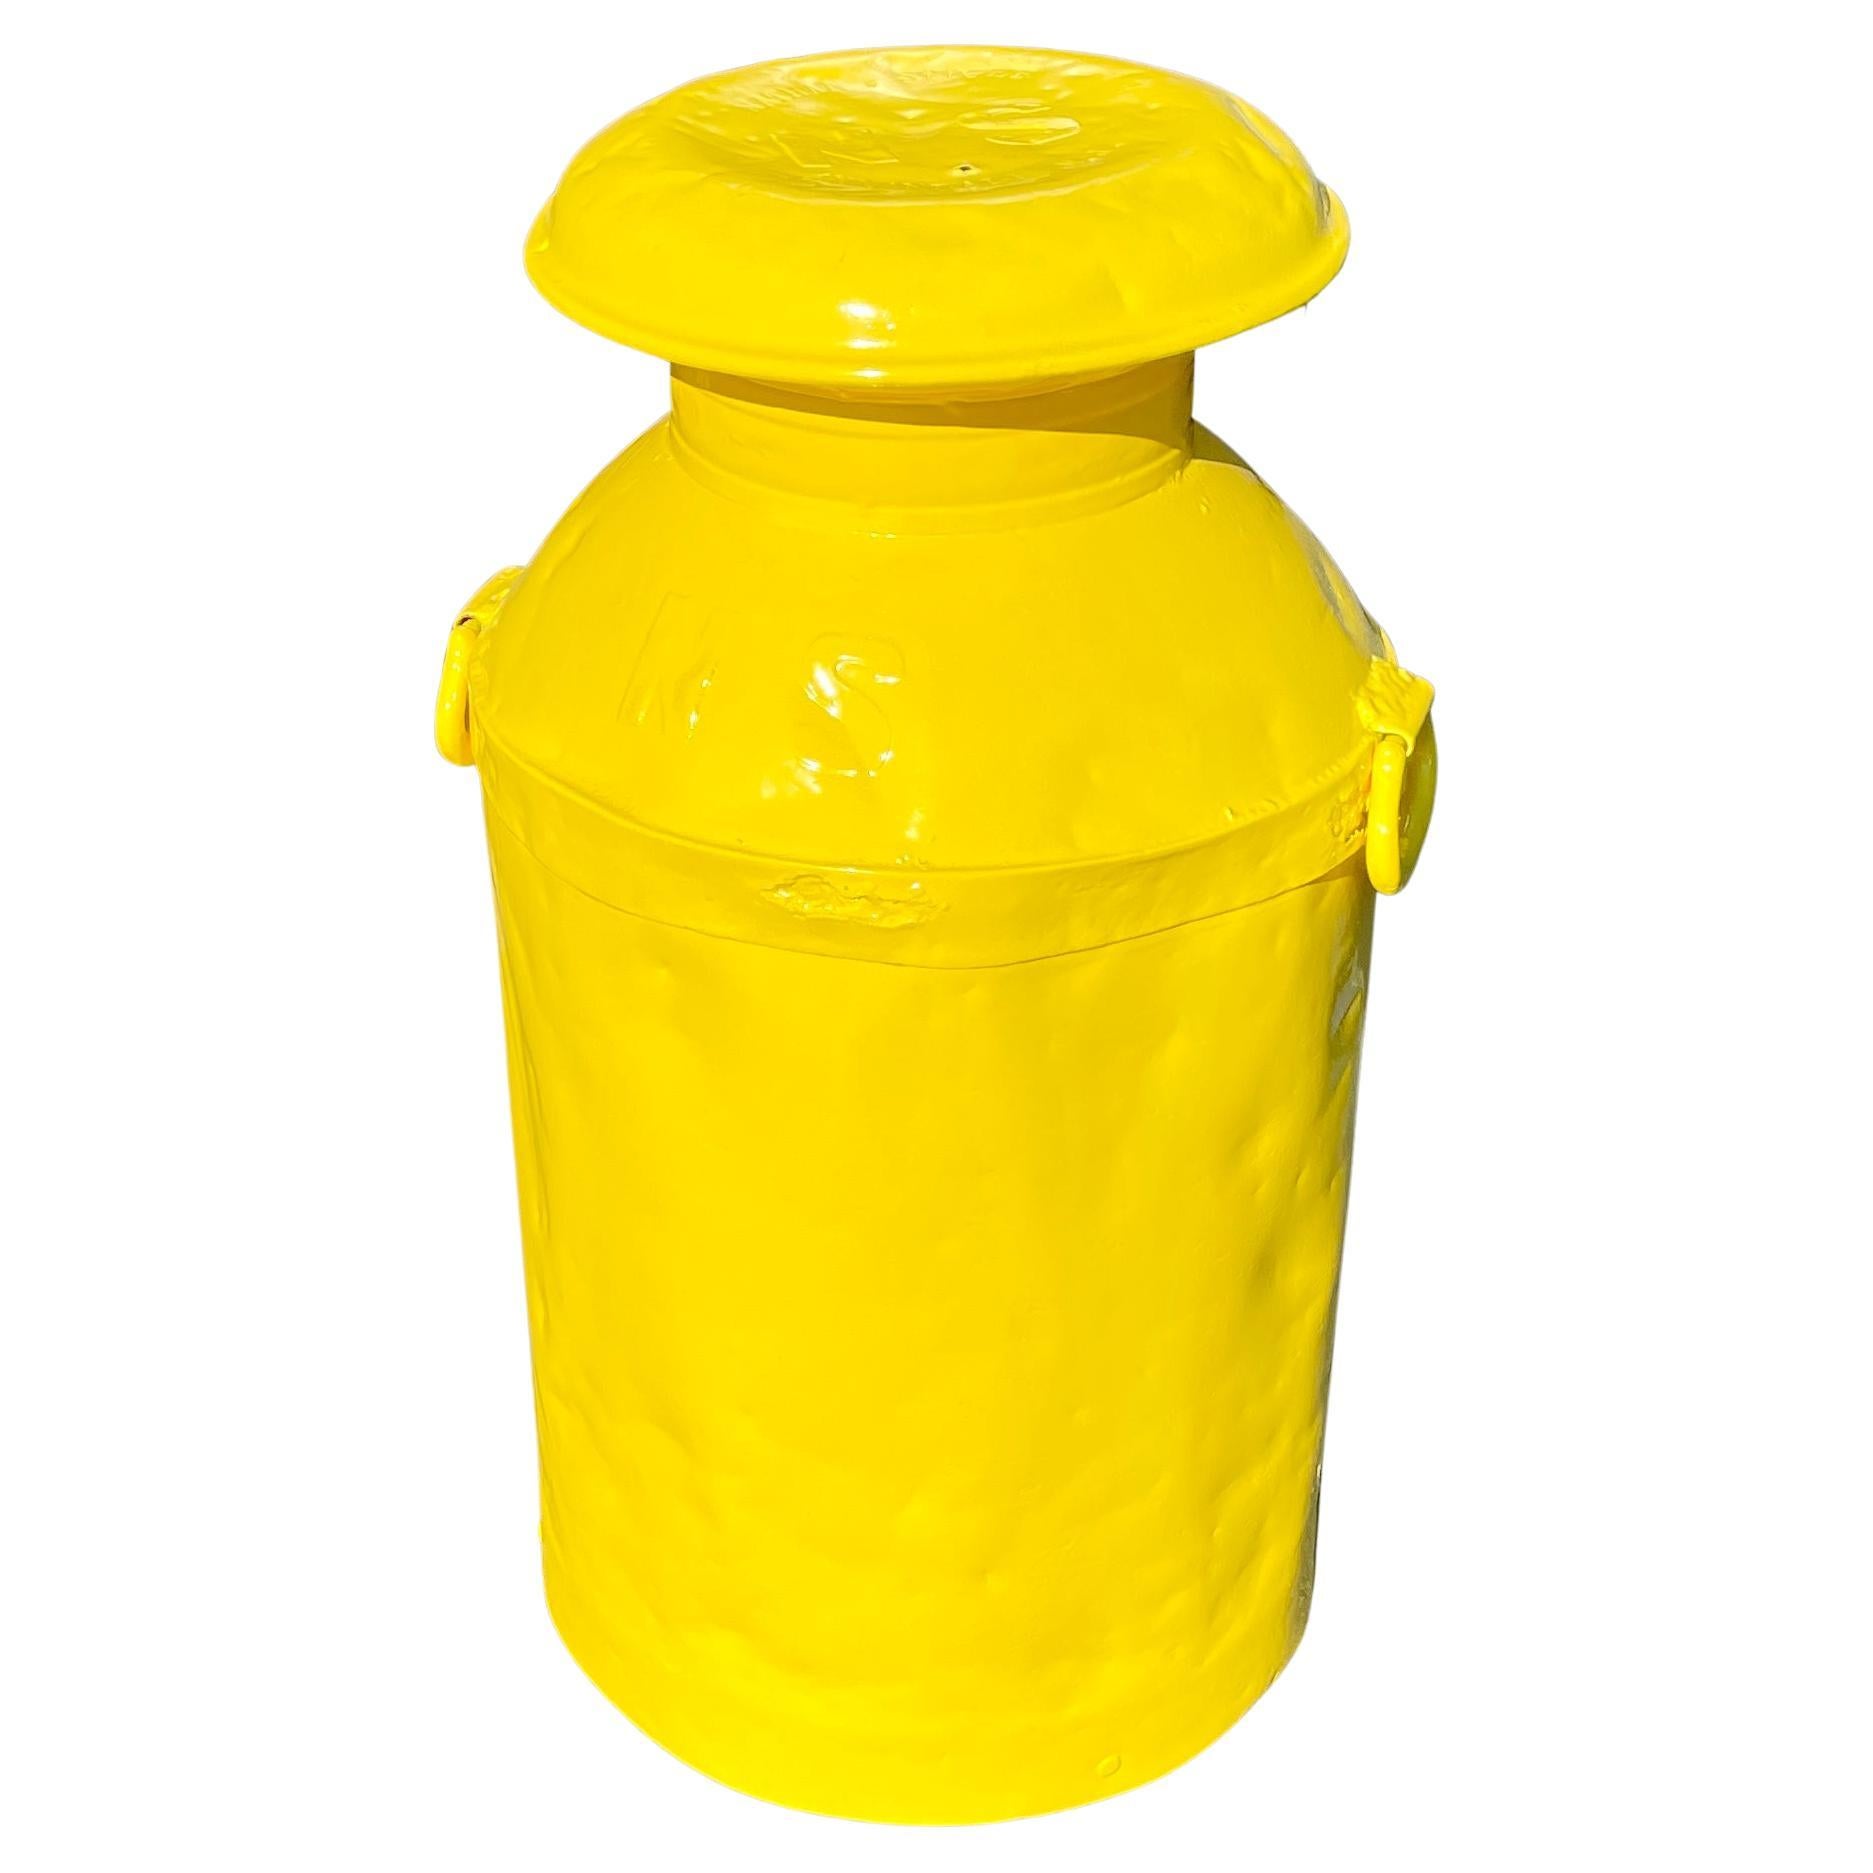 Vintage metal milk can table, early 20th century. This heavy gauge metal milk jug has been updated with an exciting bright sunshine yellow powder coat finish. The can is sturdy and will make a striking addition as a side table to any room or decor.